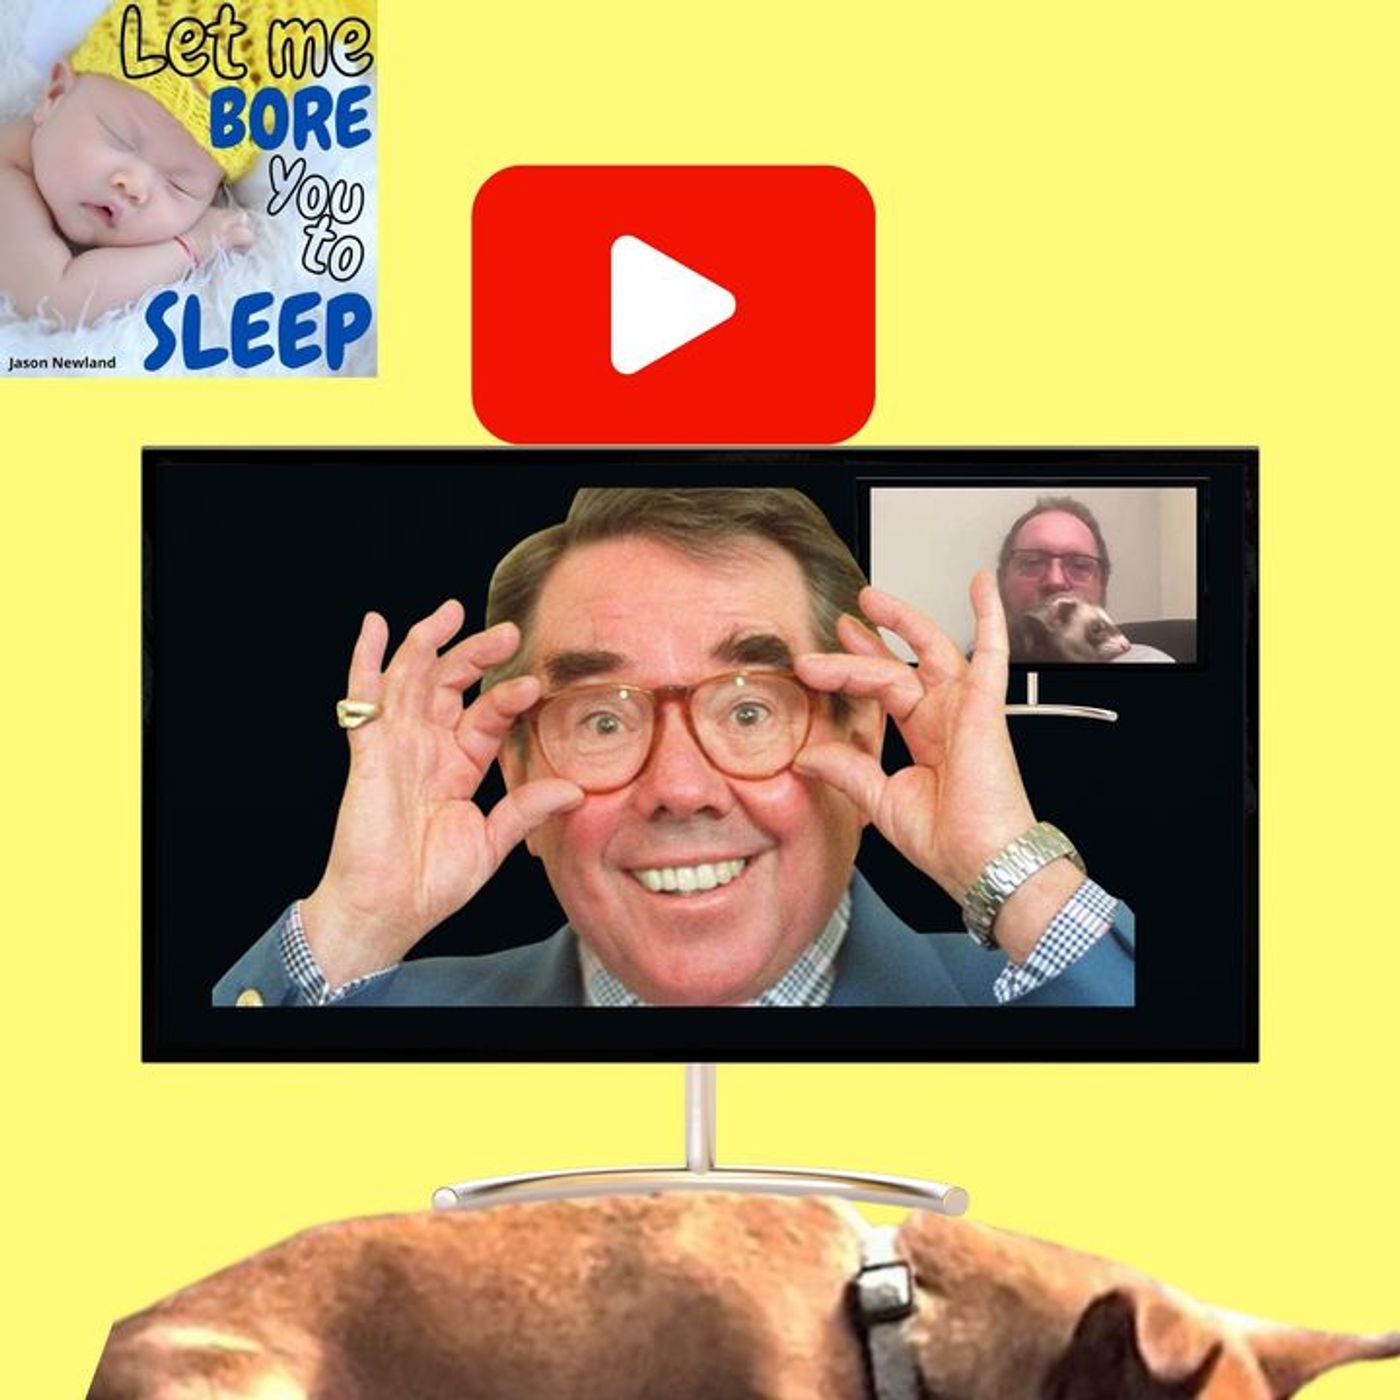 (10 hours) #1043 - Youtube - Let me bore you to sleep